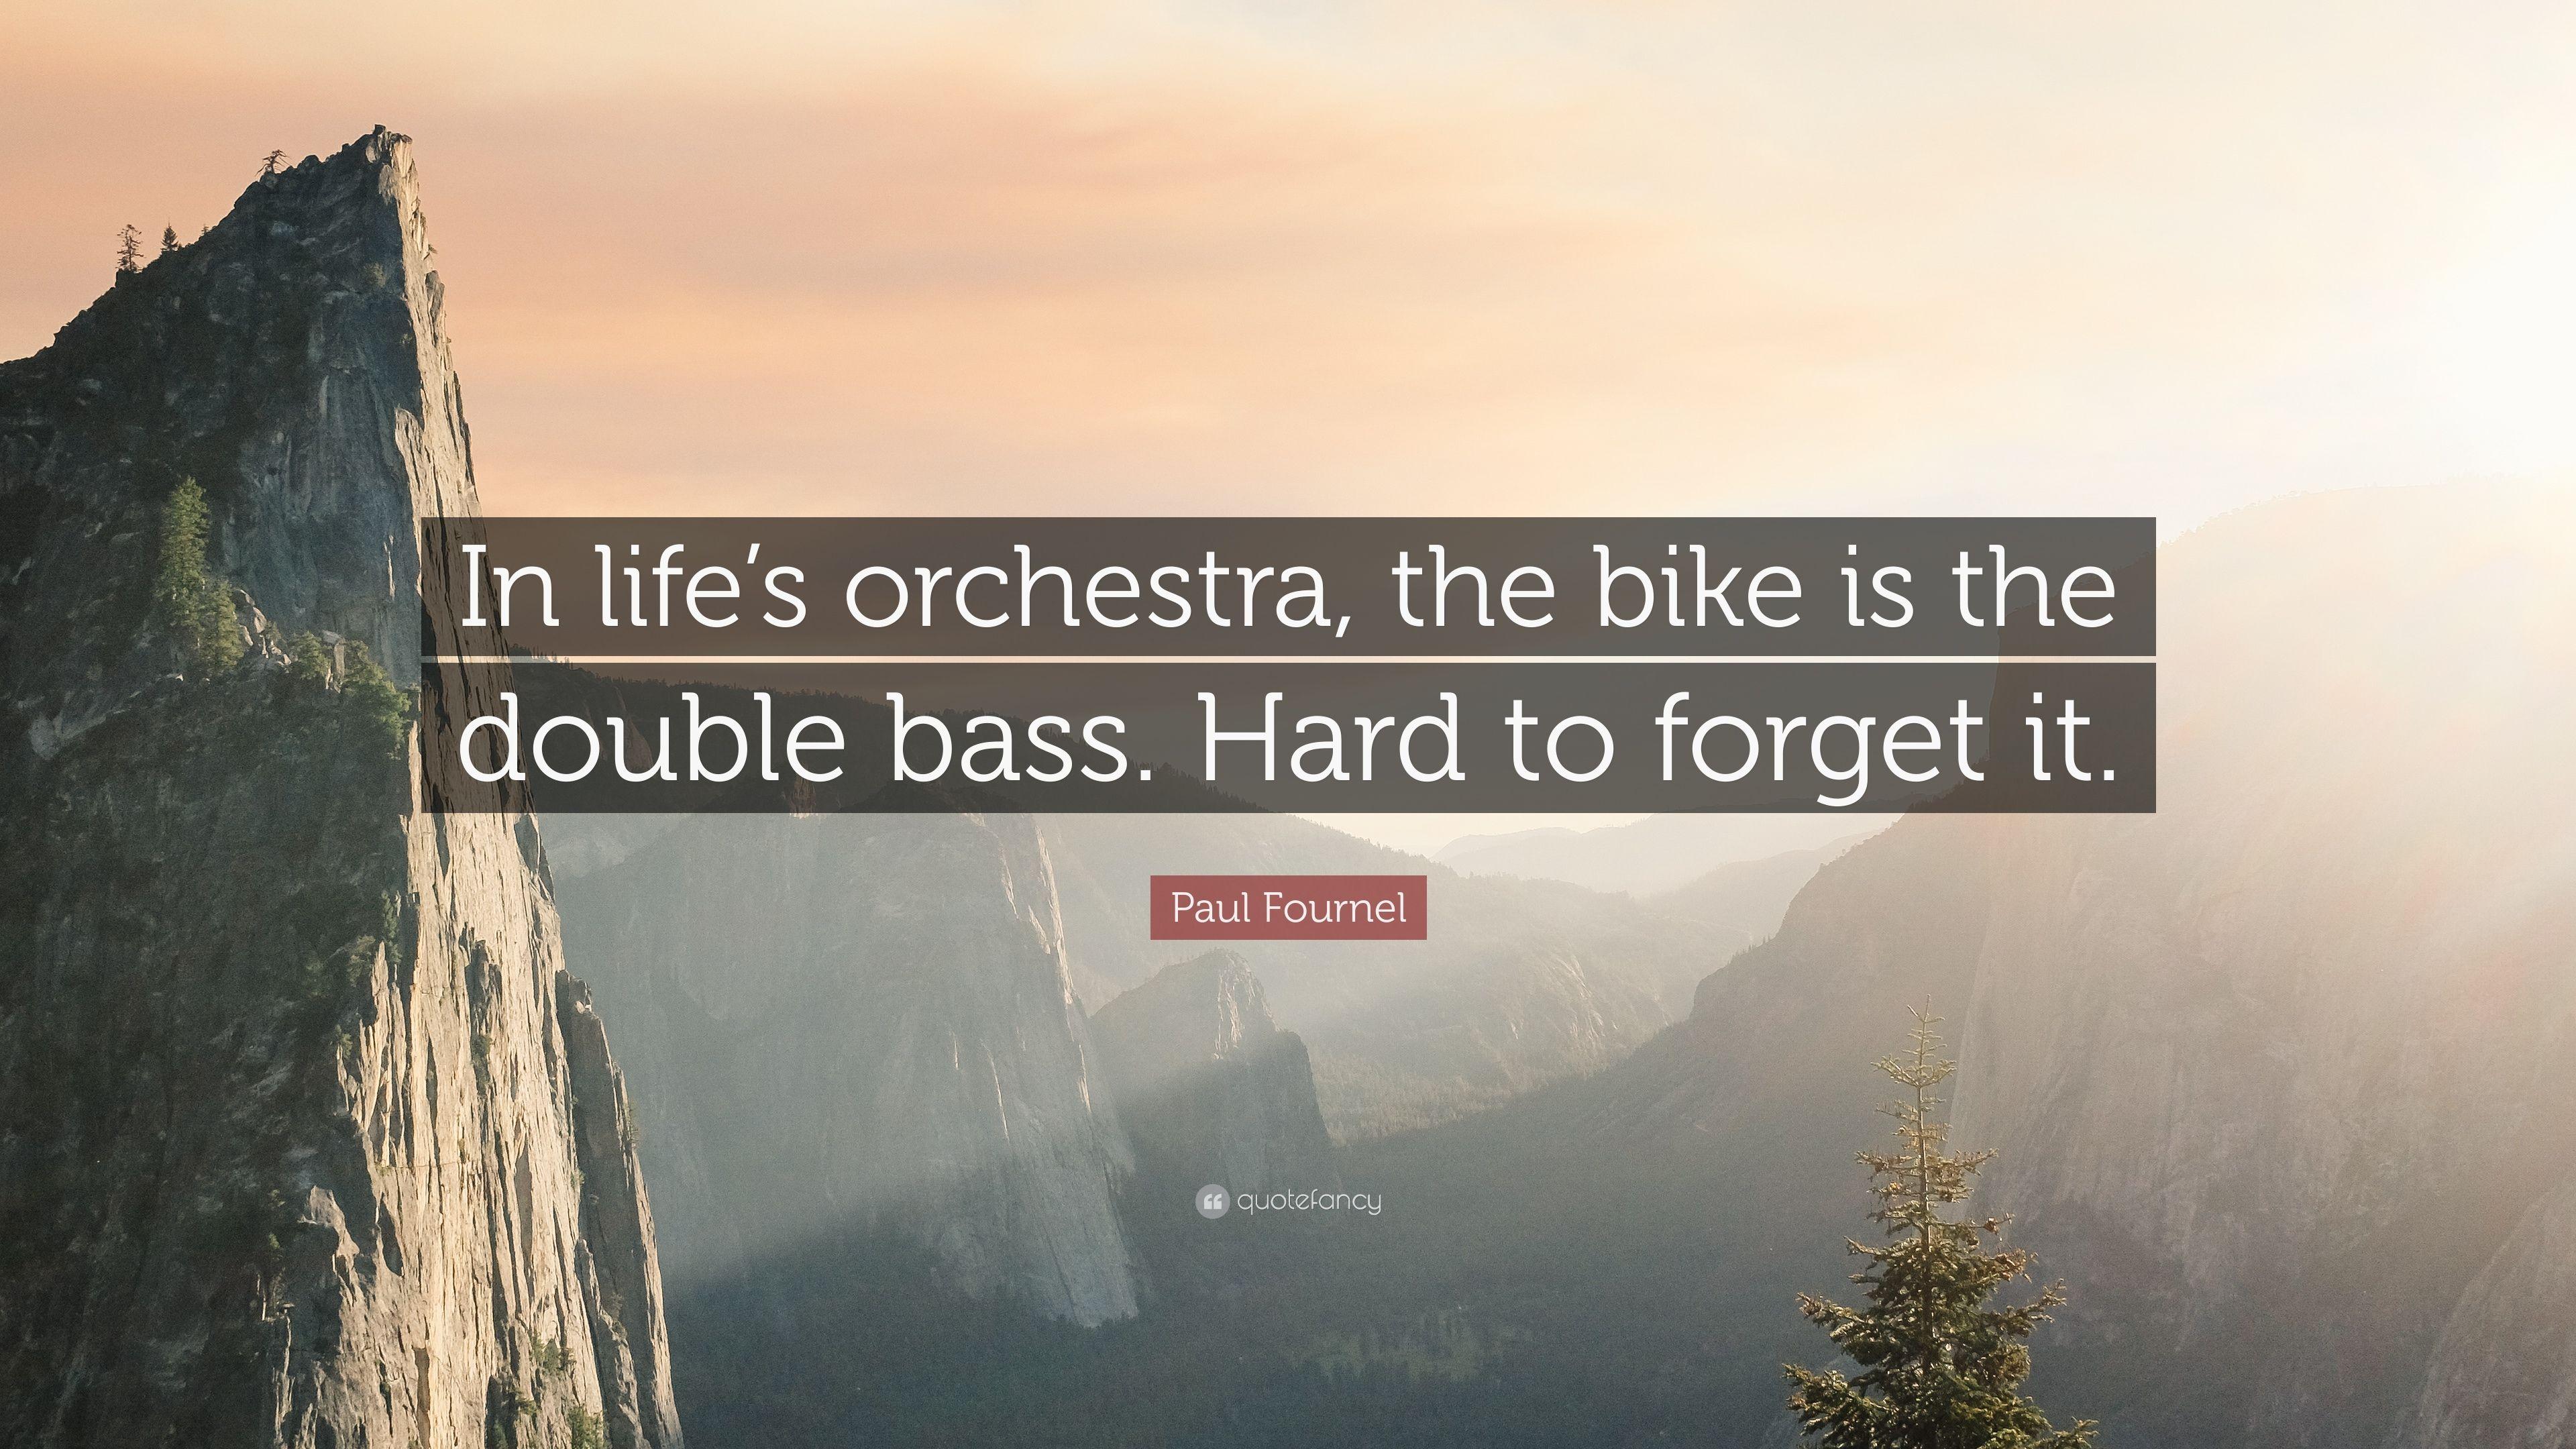 Paul Fournel Quote: “In life's orchestra, the bike is the double